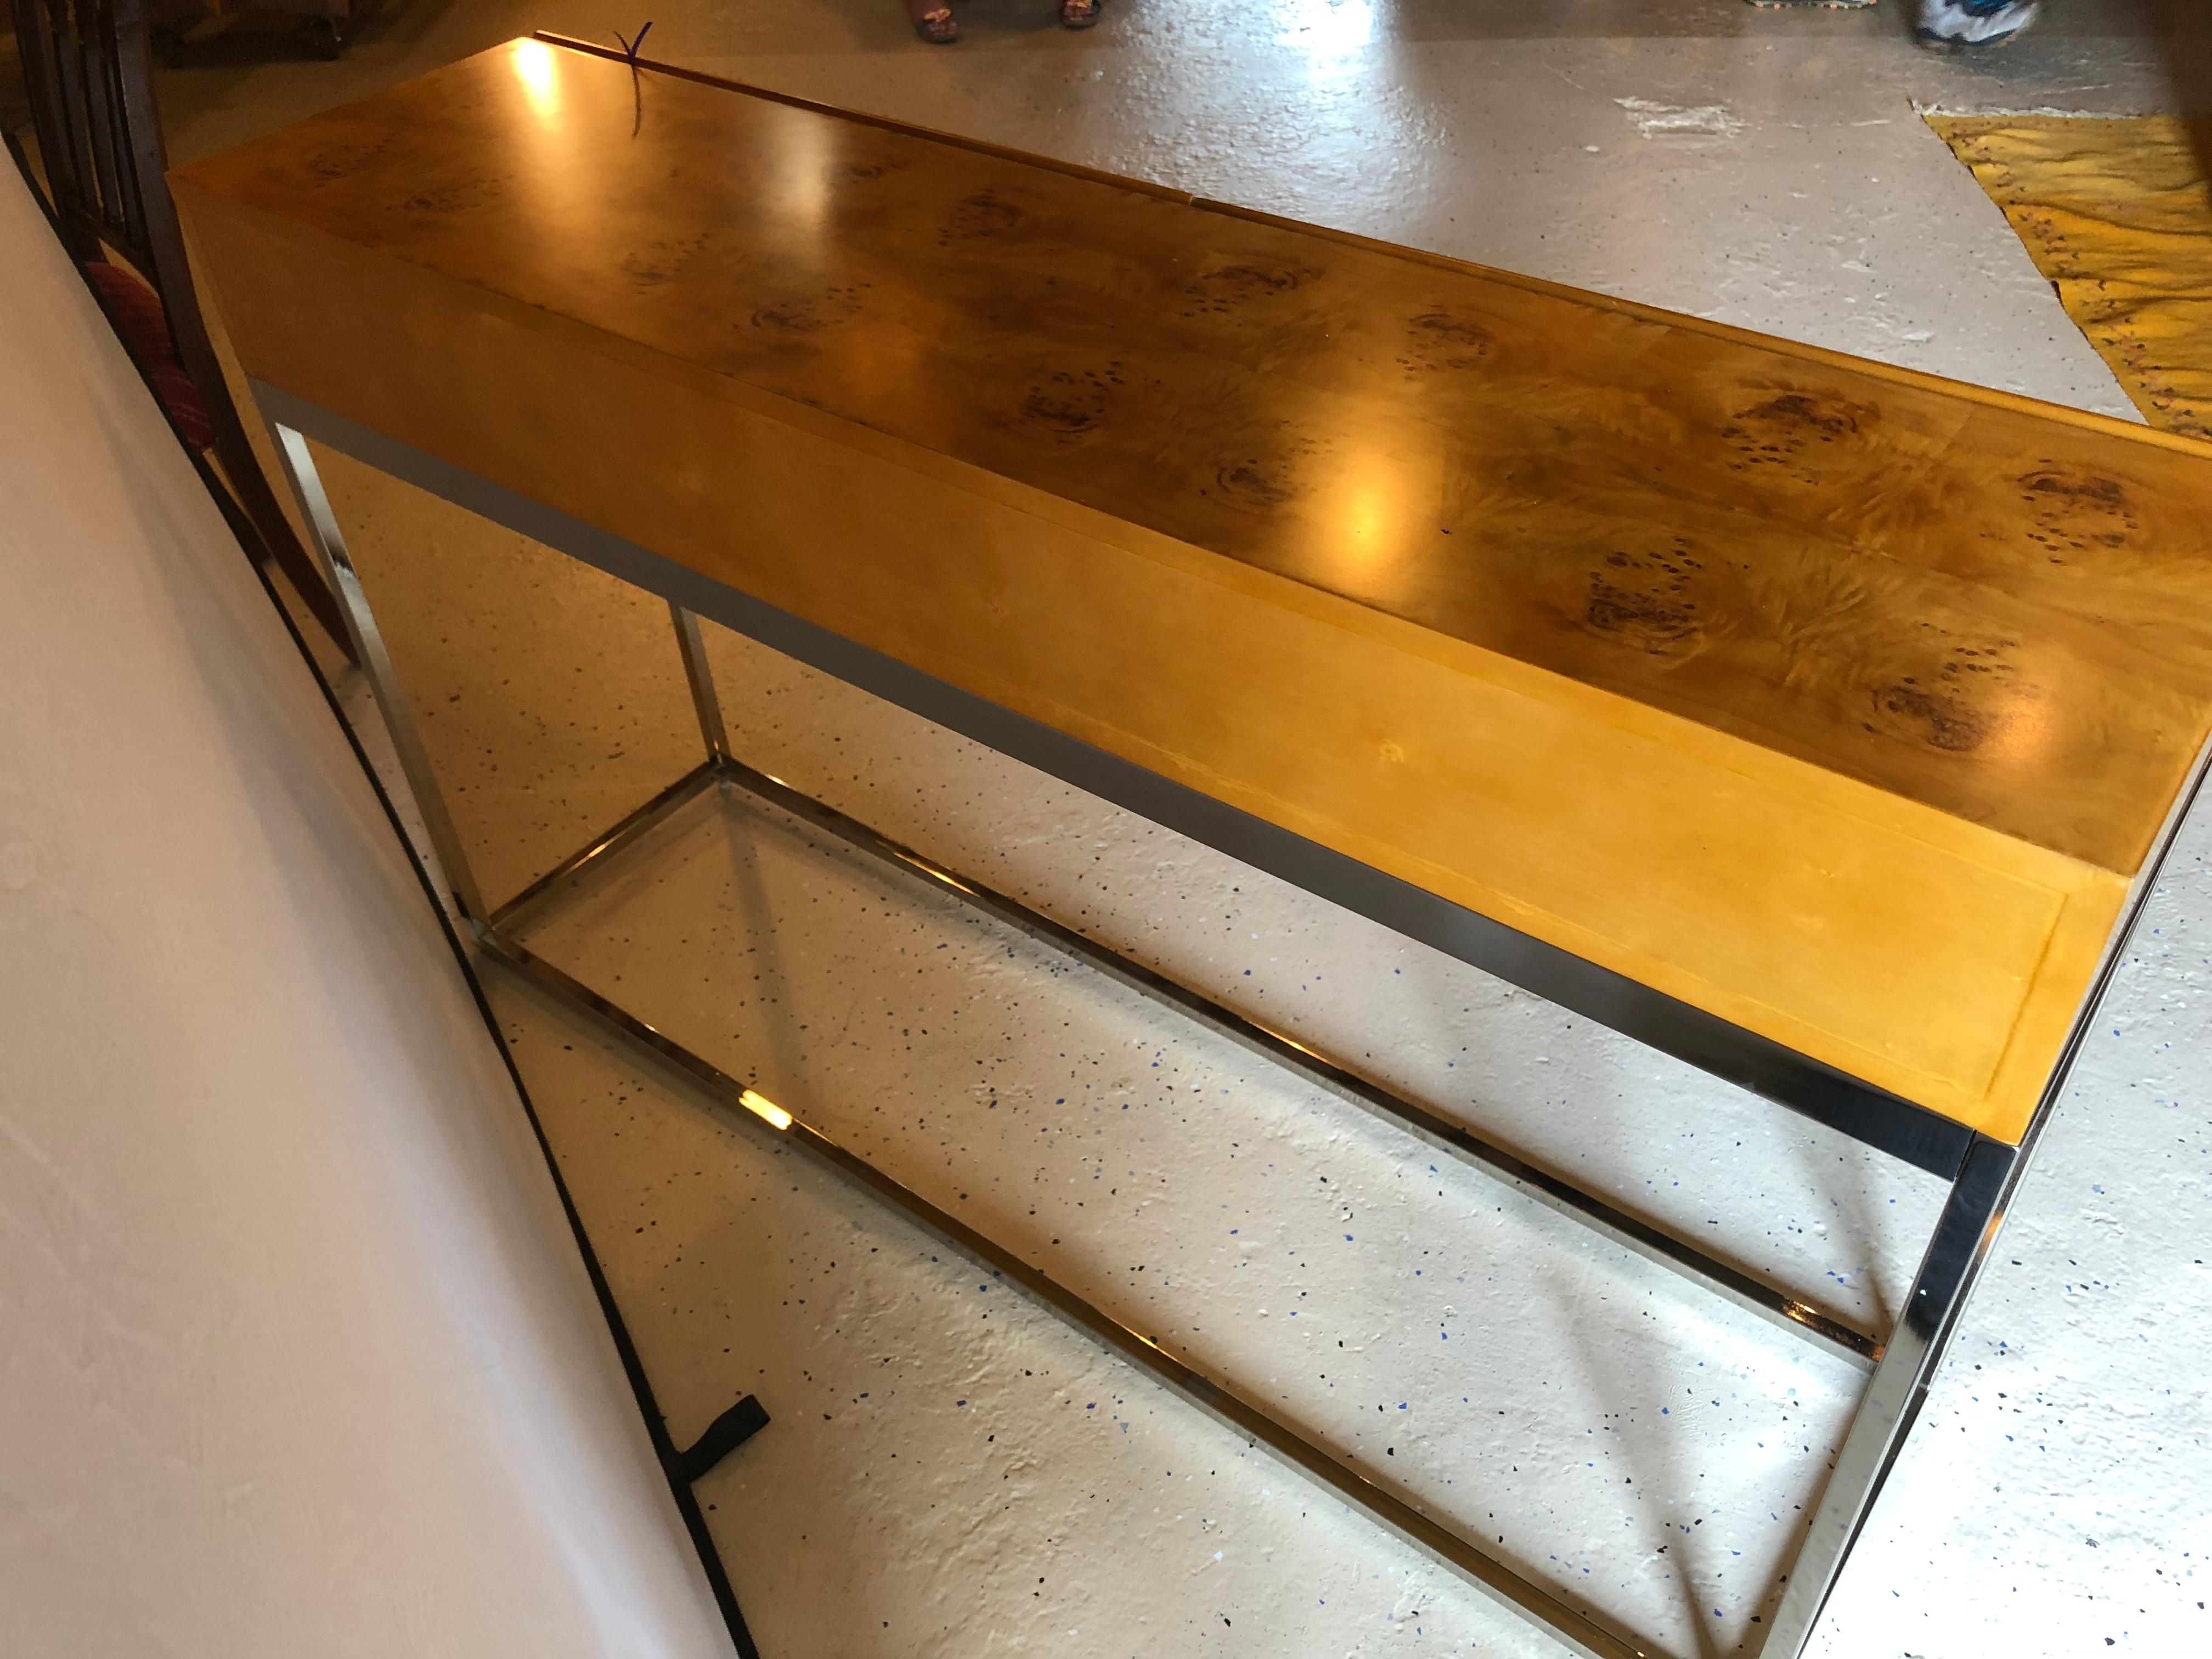 20th Century Console Table with Nice Burl Grain Two Drawers on a Chrome Base